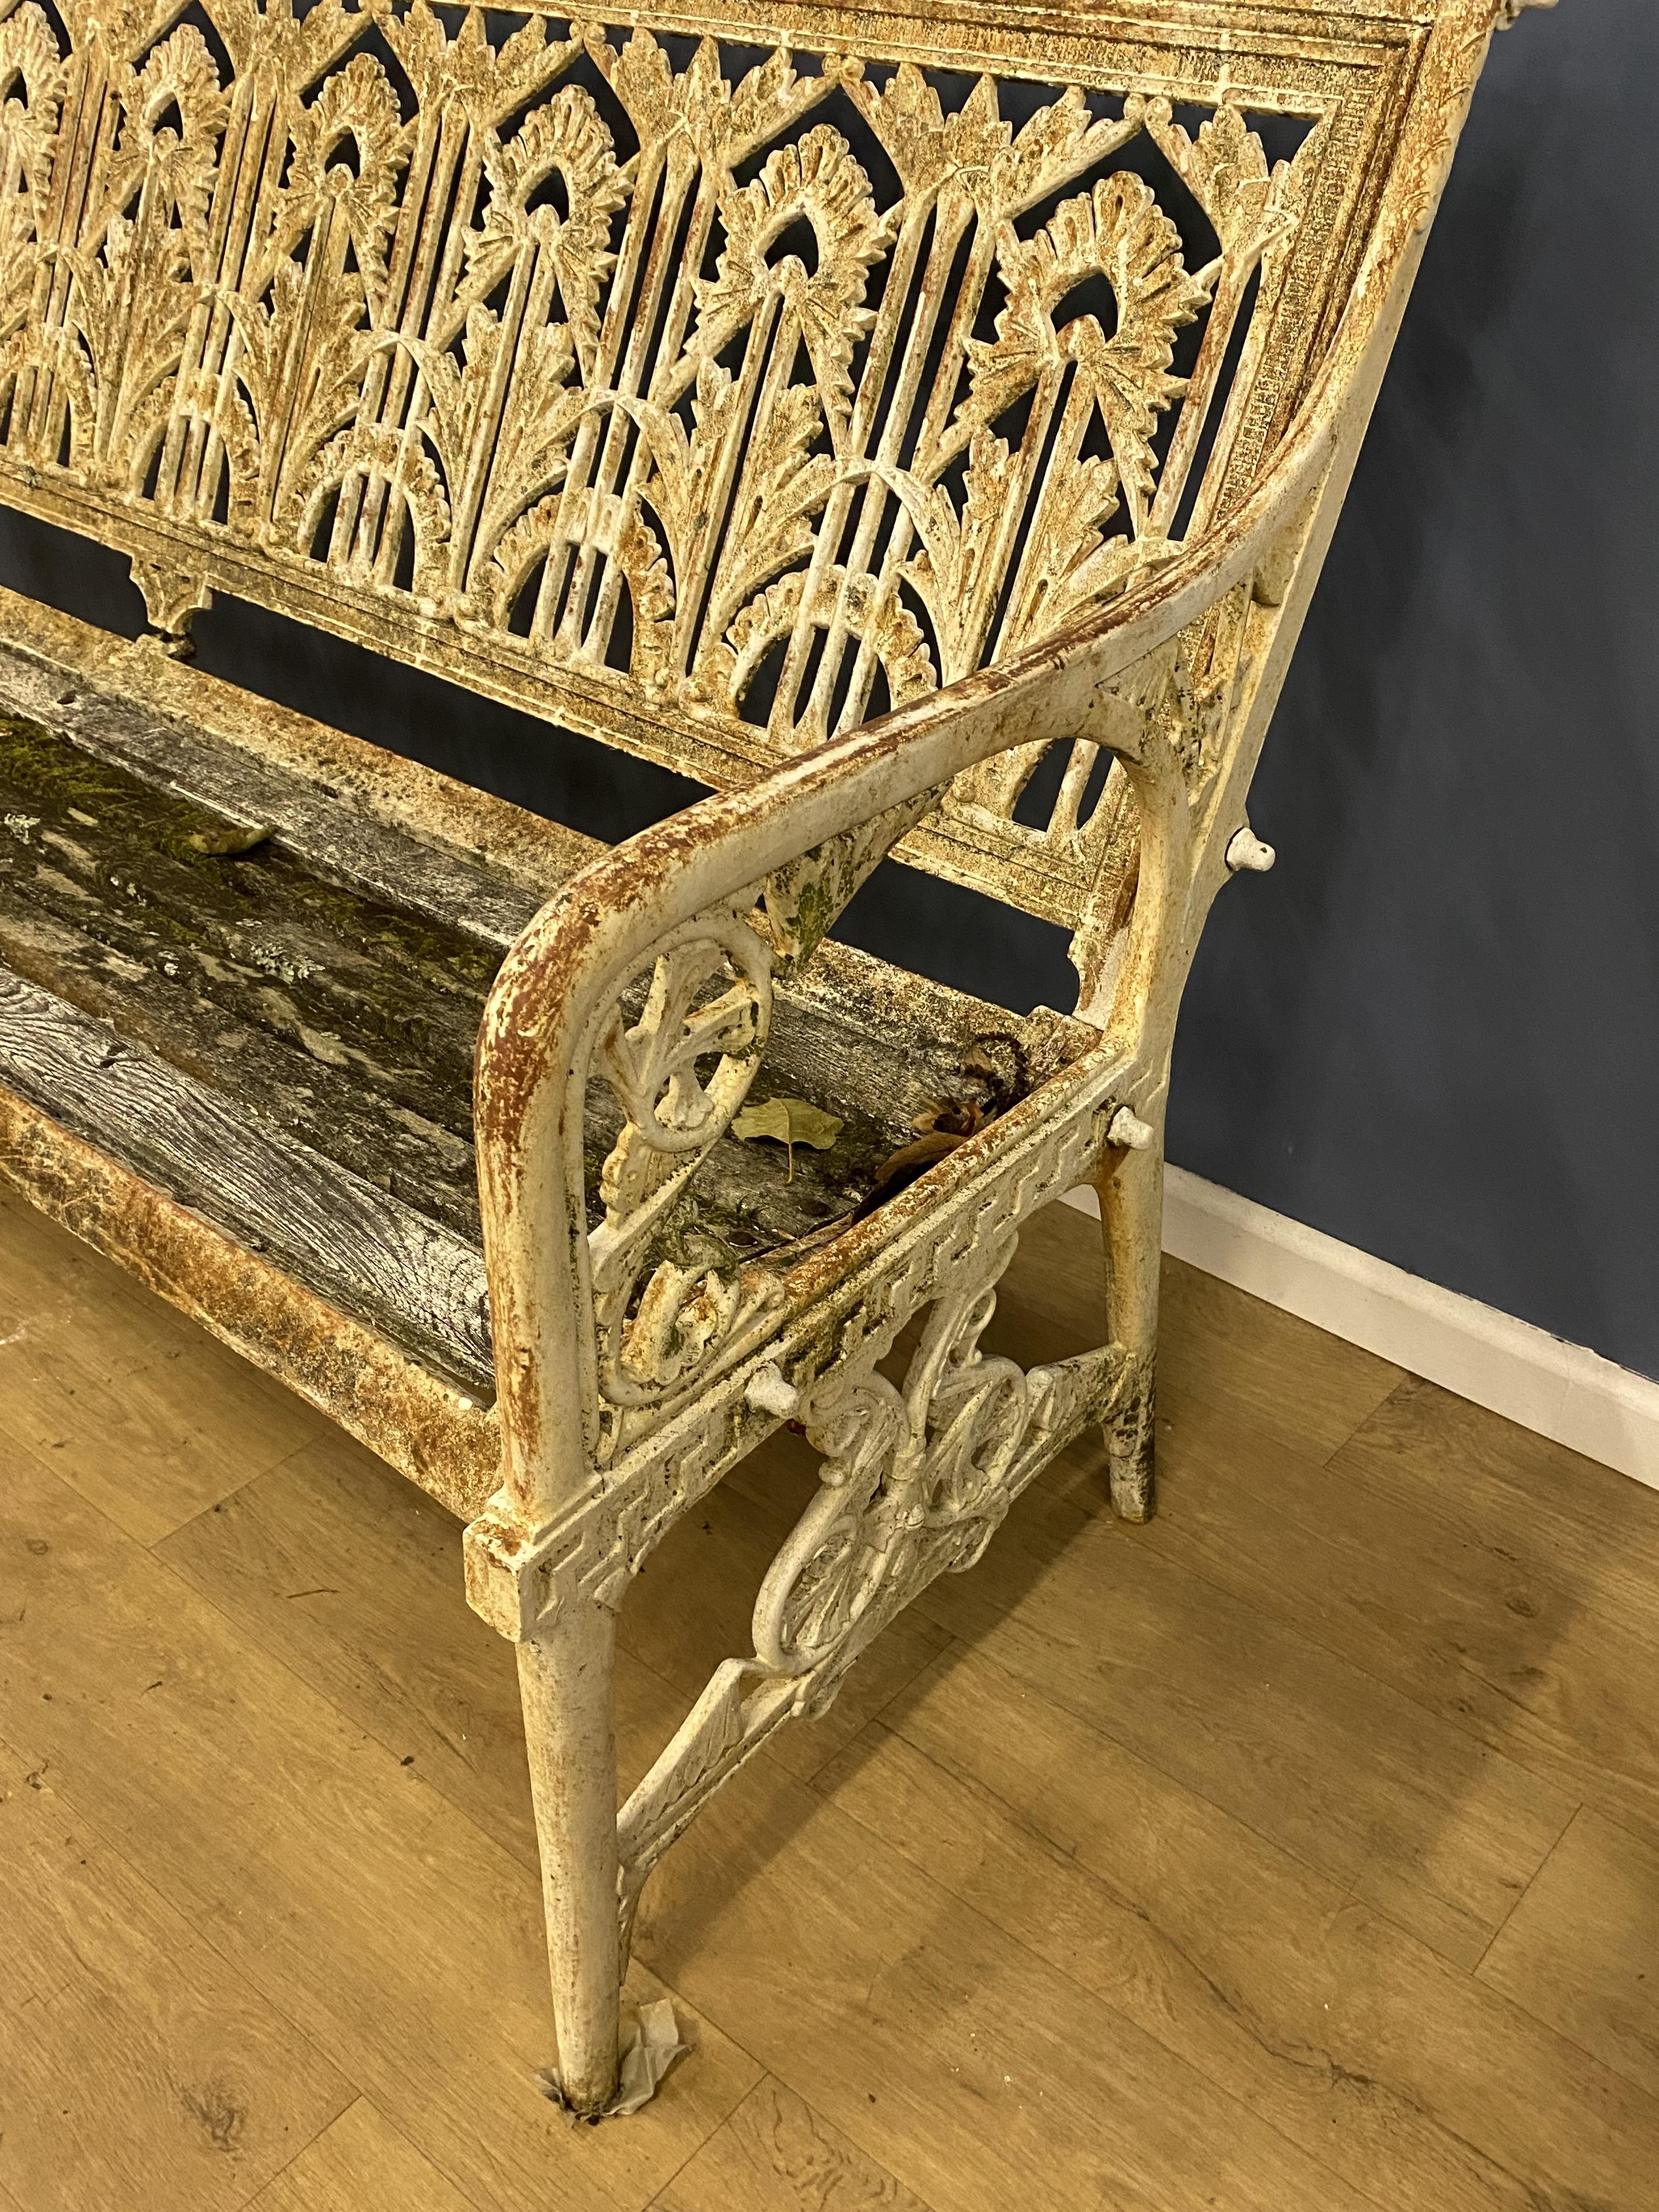 Cast iron Coalbrookdale style garden bench. From the Estate of Dame Mary Quant - Image 4 of 6